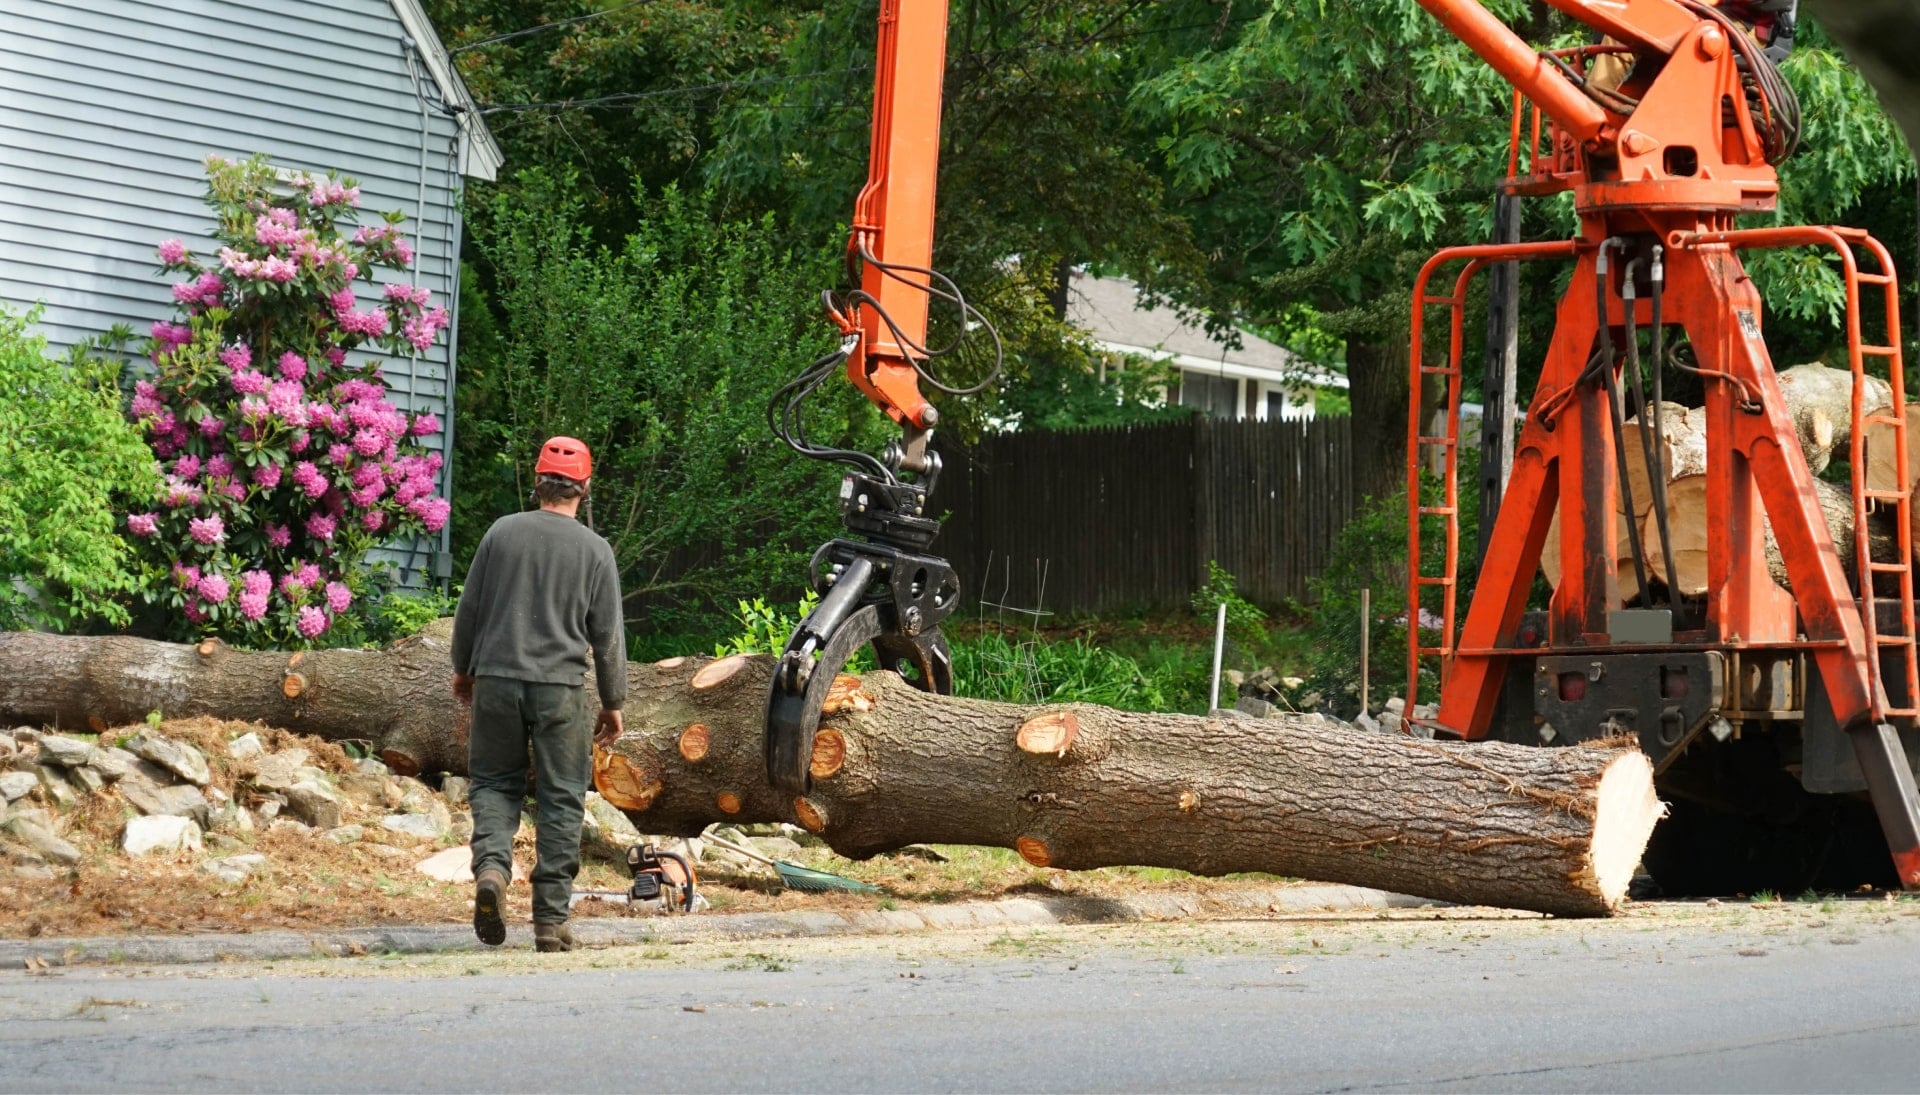 An orange tree removal machine picking up branch in Los Angeles, California